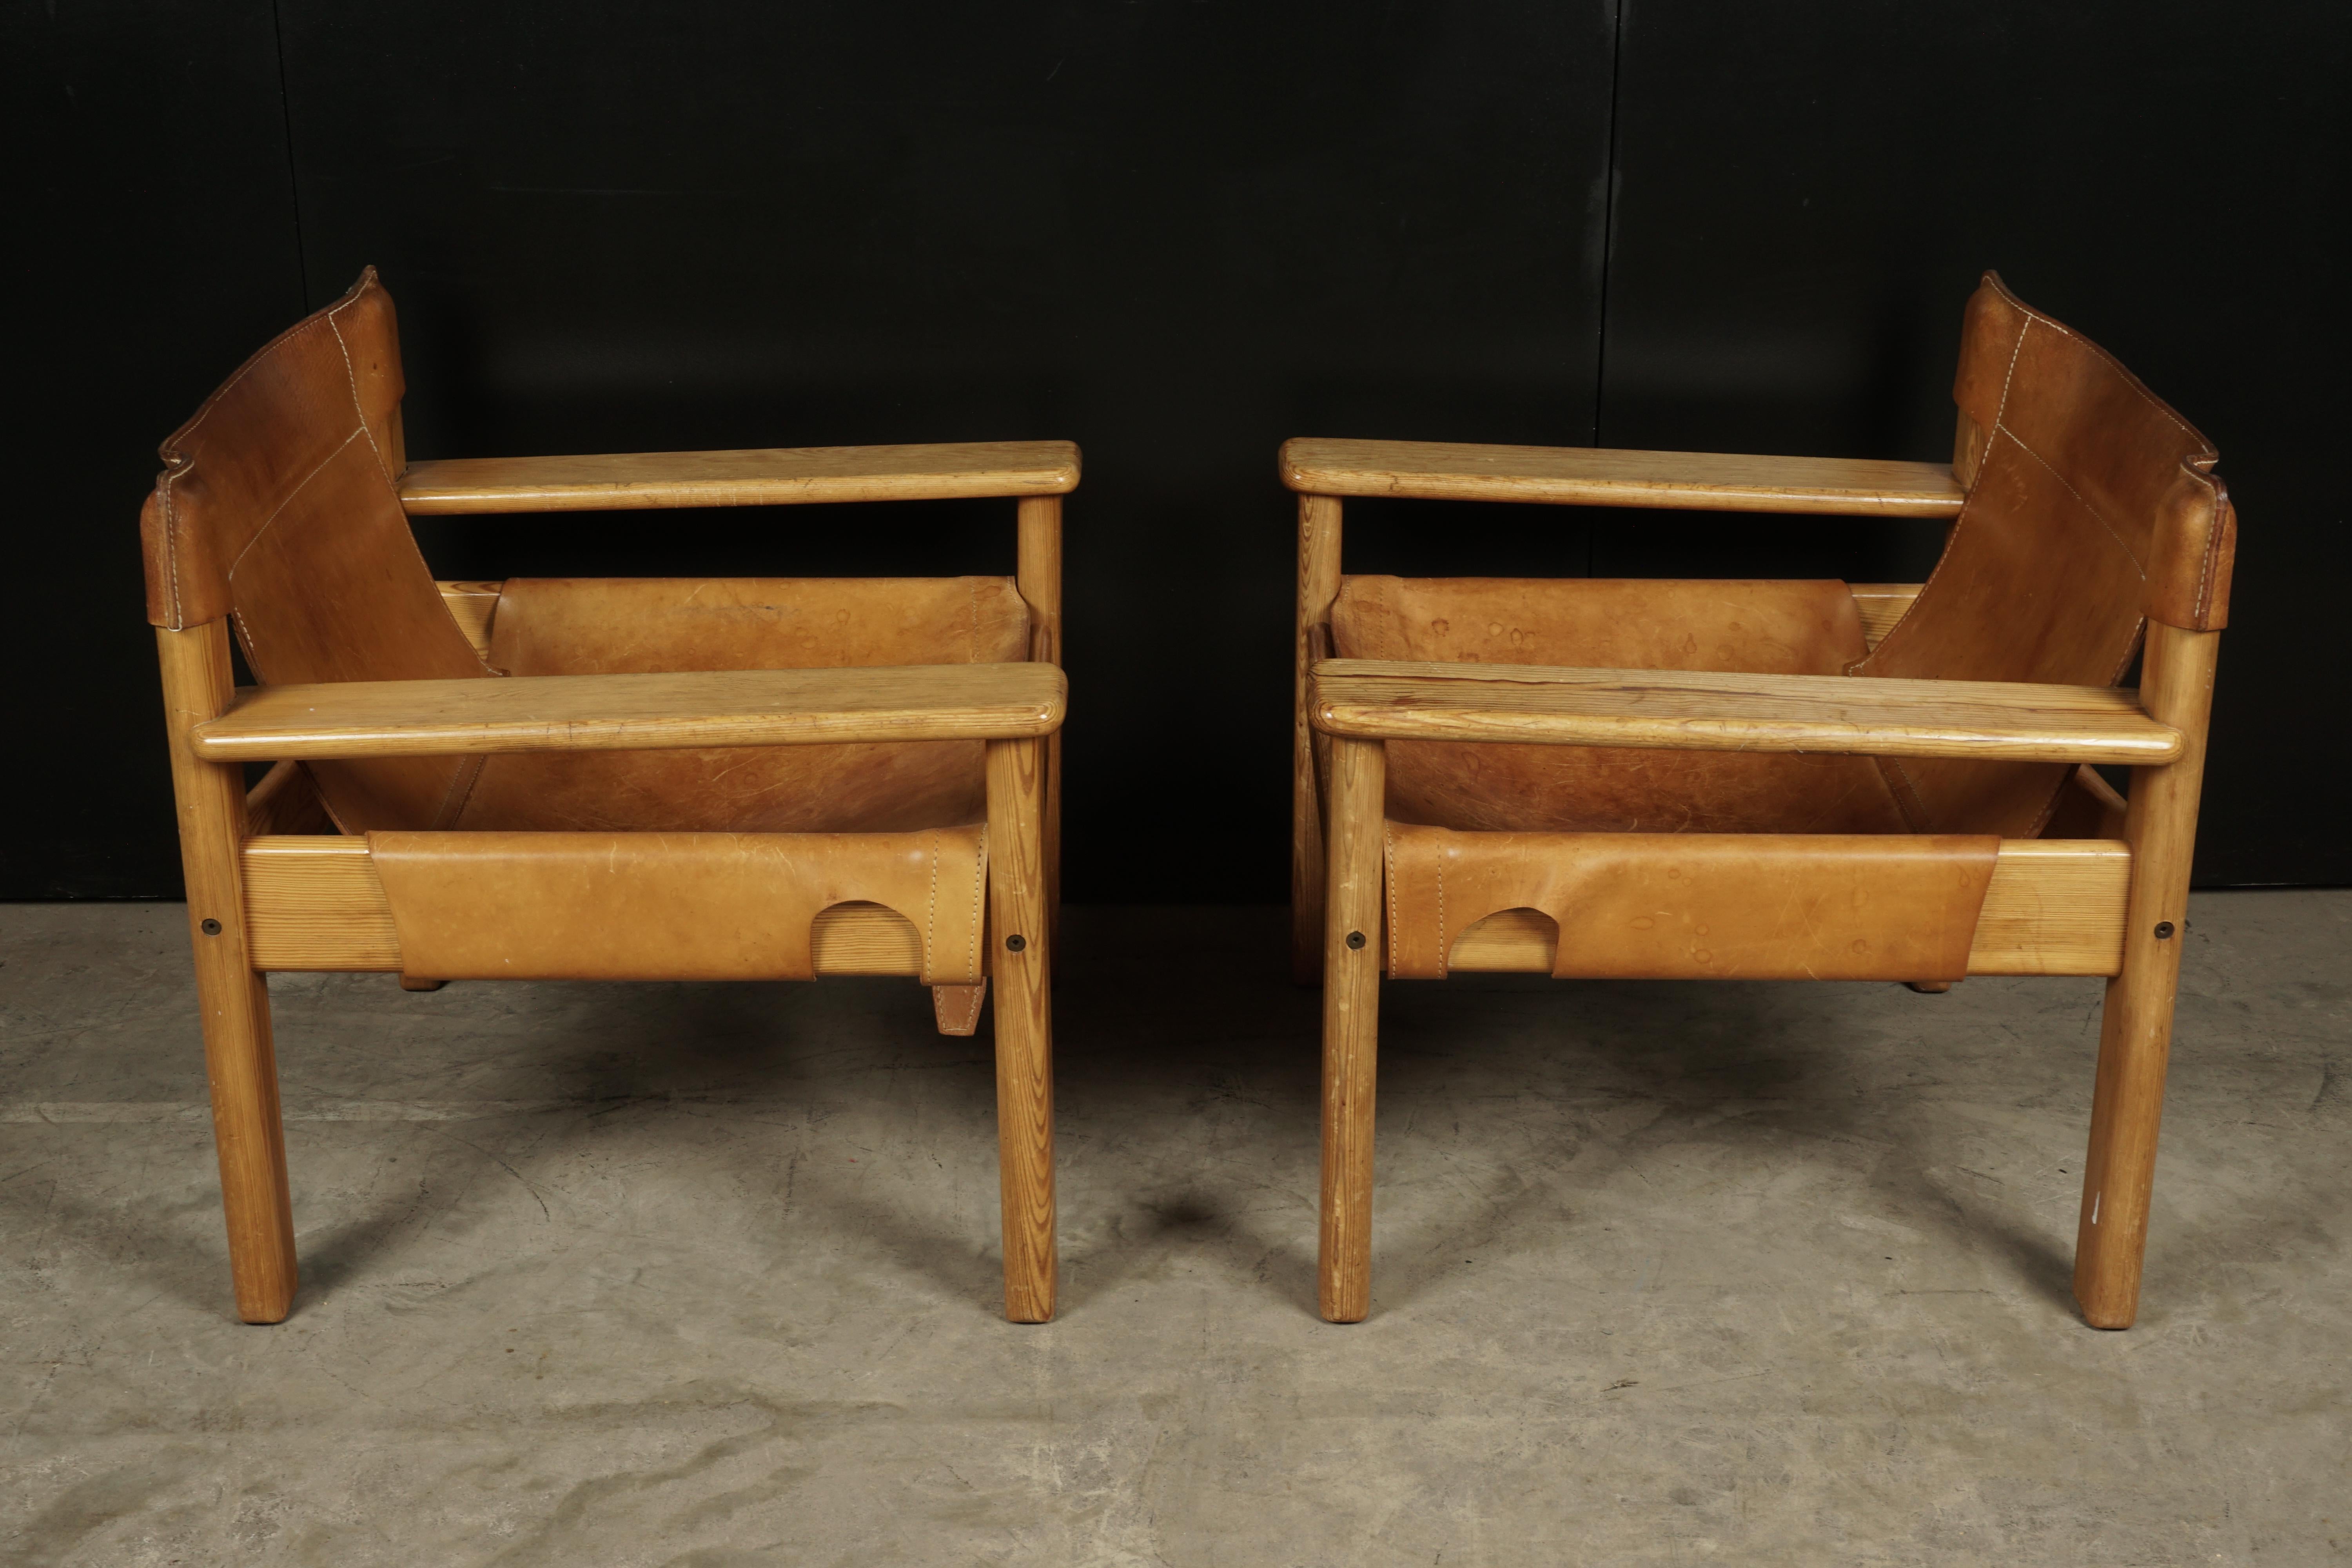 Midcentury pair of Spanish style chairs from Sweden, circa 1970. Original thick cognac leather on a solid pine frame. Leather with fantastic color and patina.